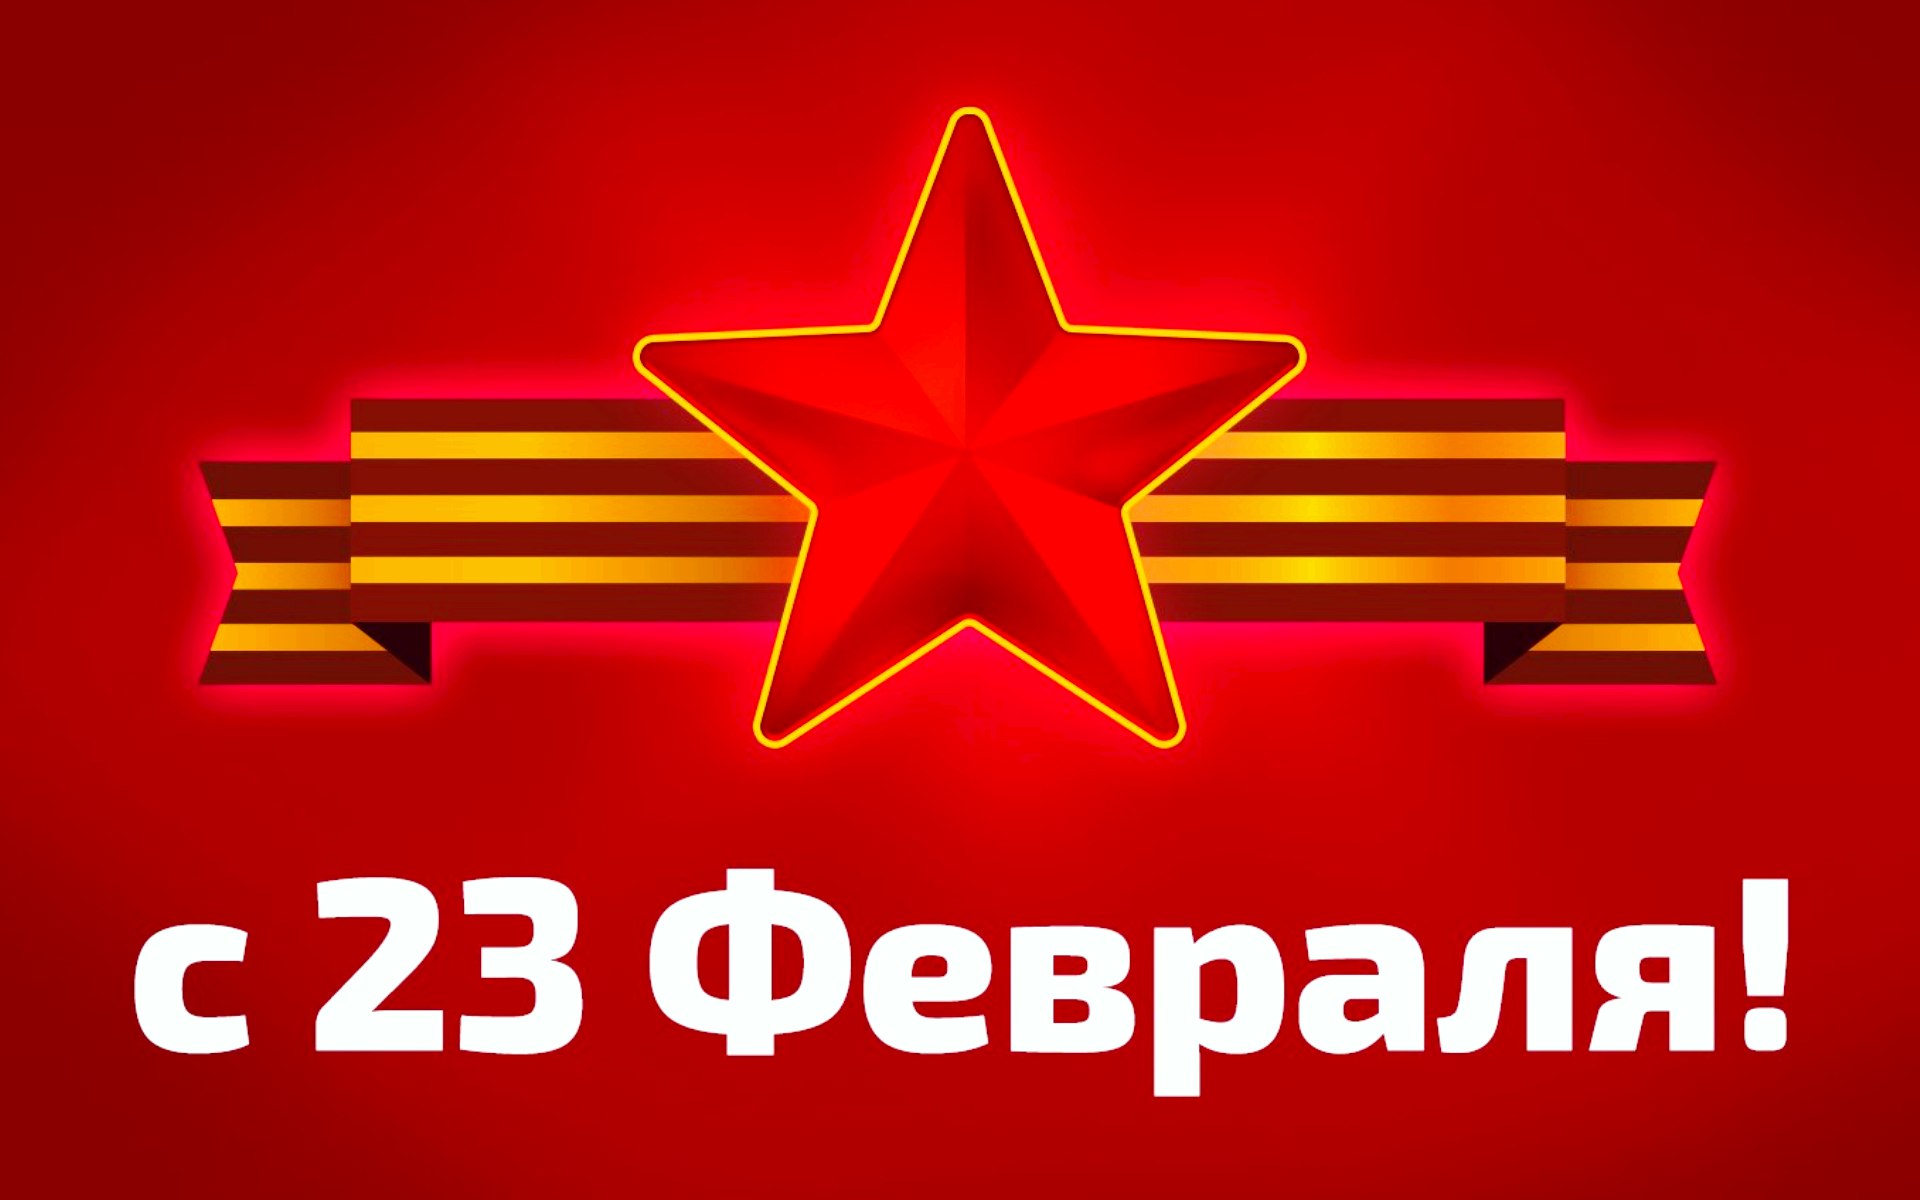 2019Holidays___Army_Star_with_St._George_ribbon_on_a_red_background_on_February_23_Defender_of_the_Fatherland_Day_132271_